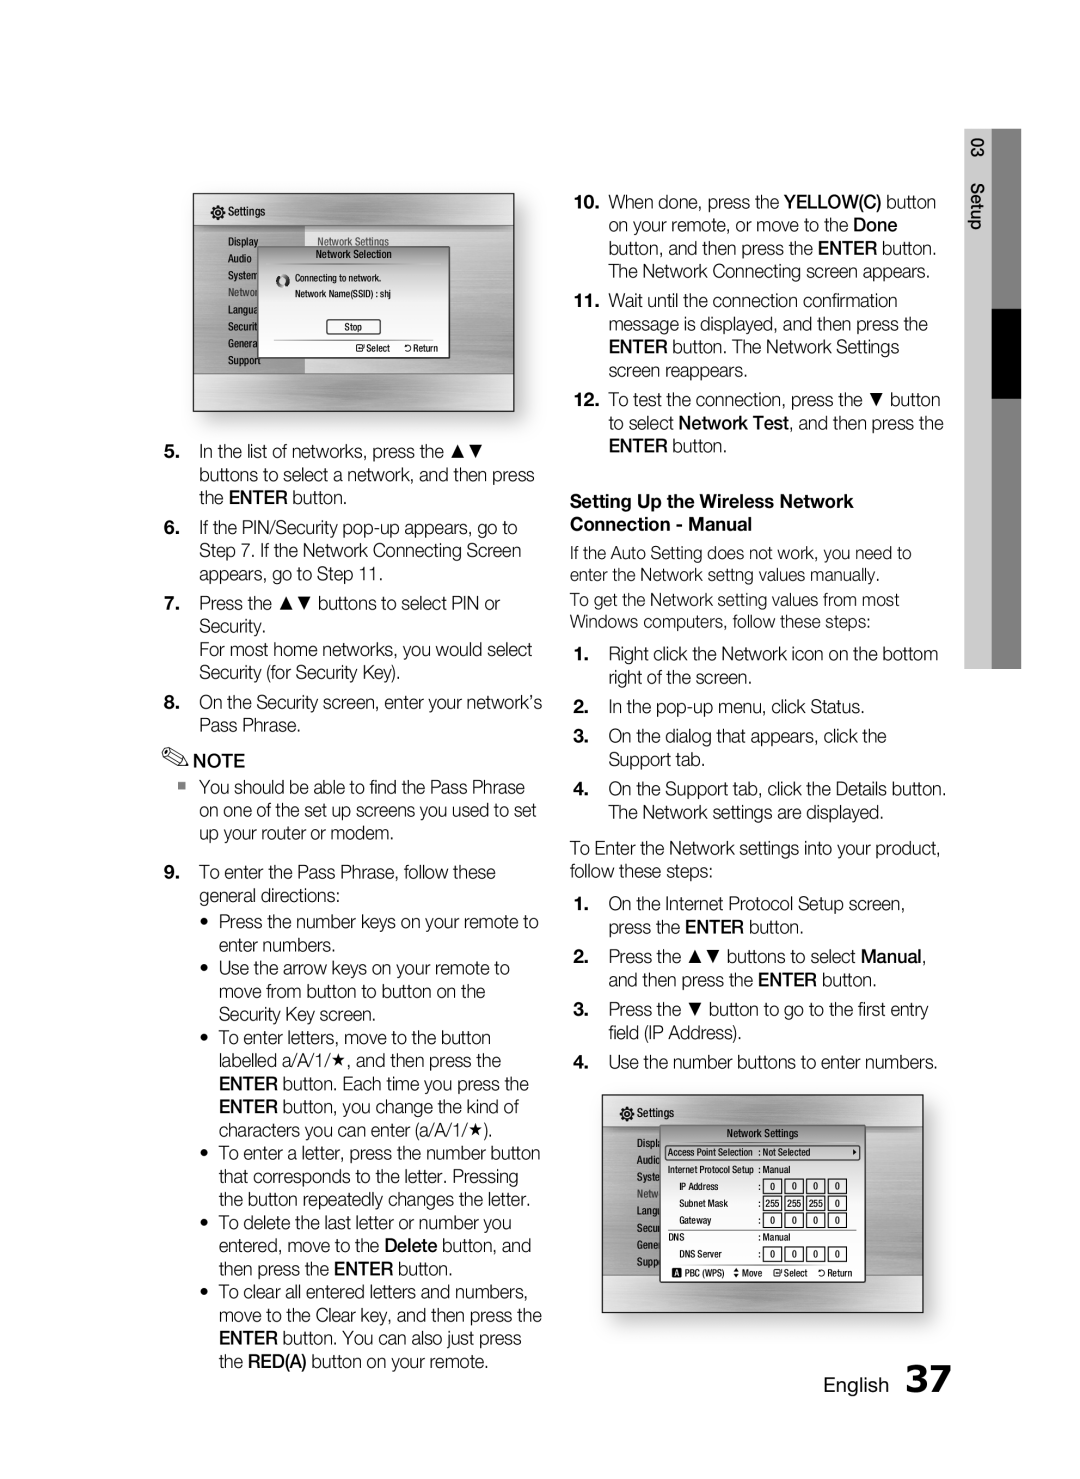 Samsung HT-C5200 user manual English, Setting Up the Wireless Network, Connection - Manual 